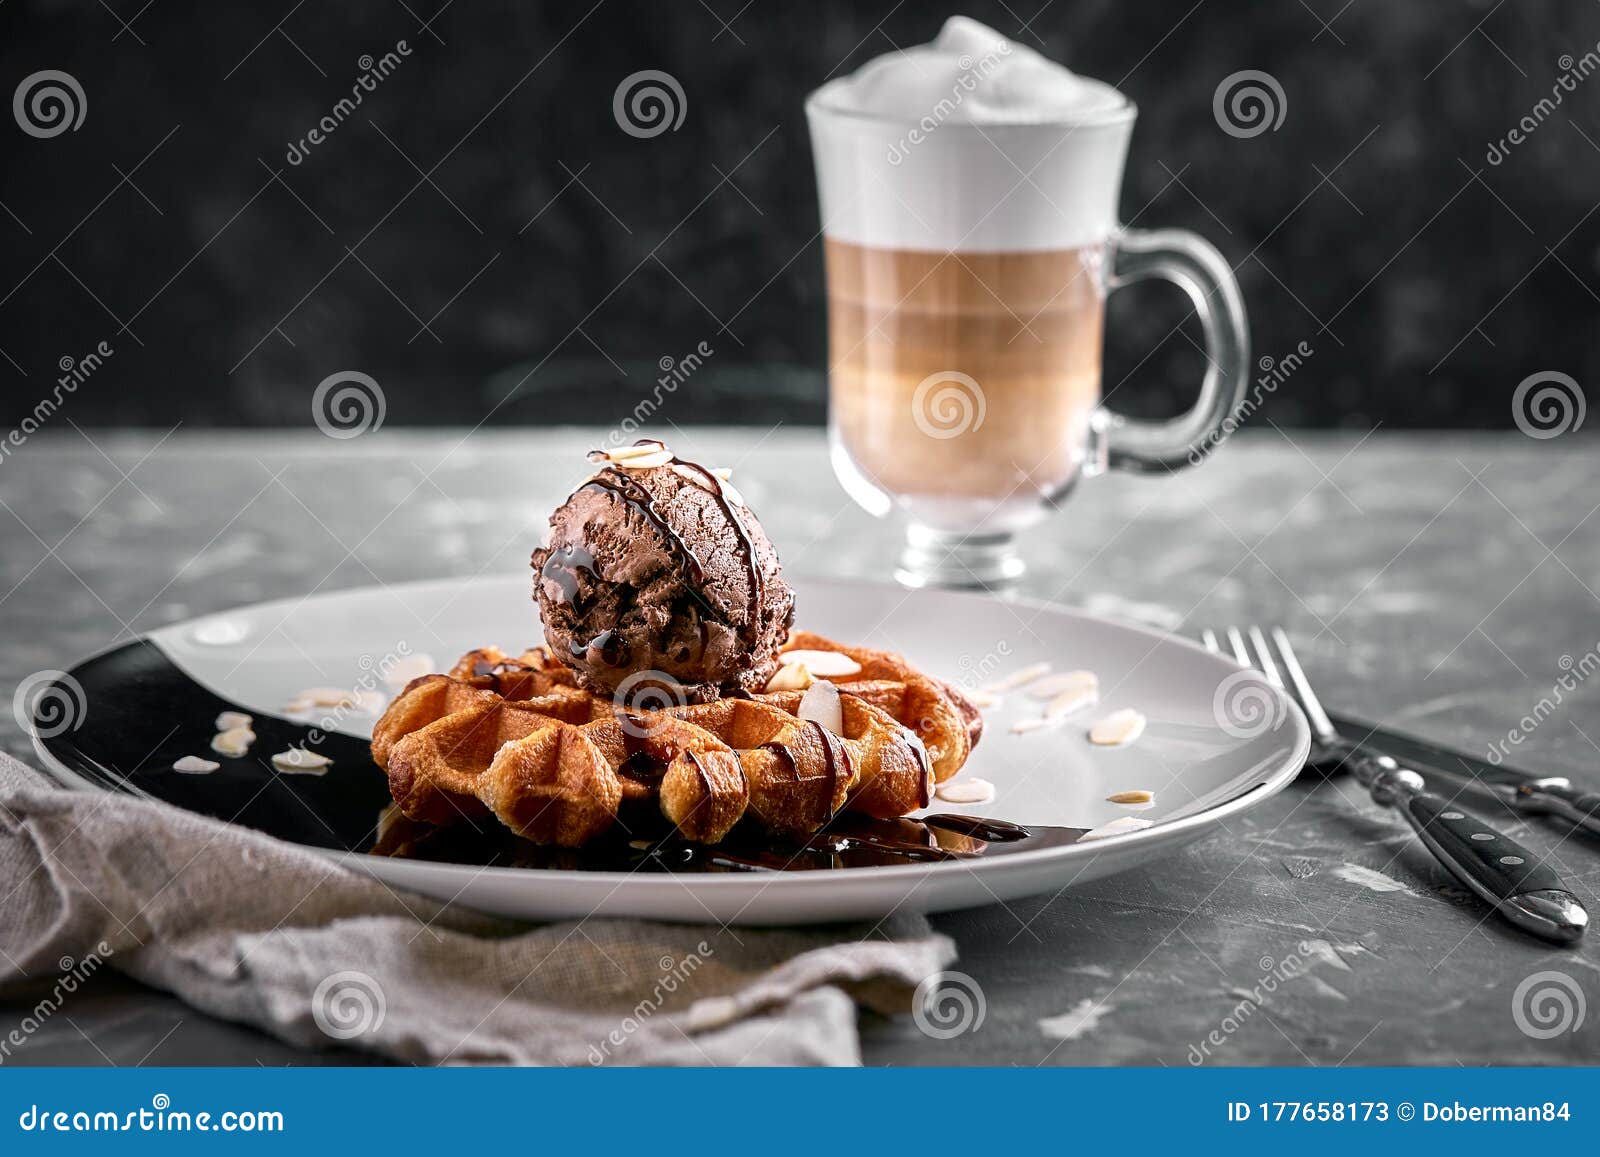 viennese waffles ice cream coffee beautiful picture dessert latte concept sweet life food photo copy space gray 177658173